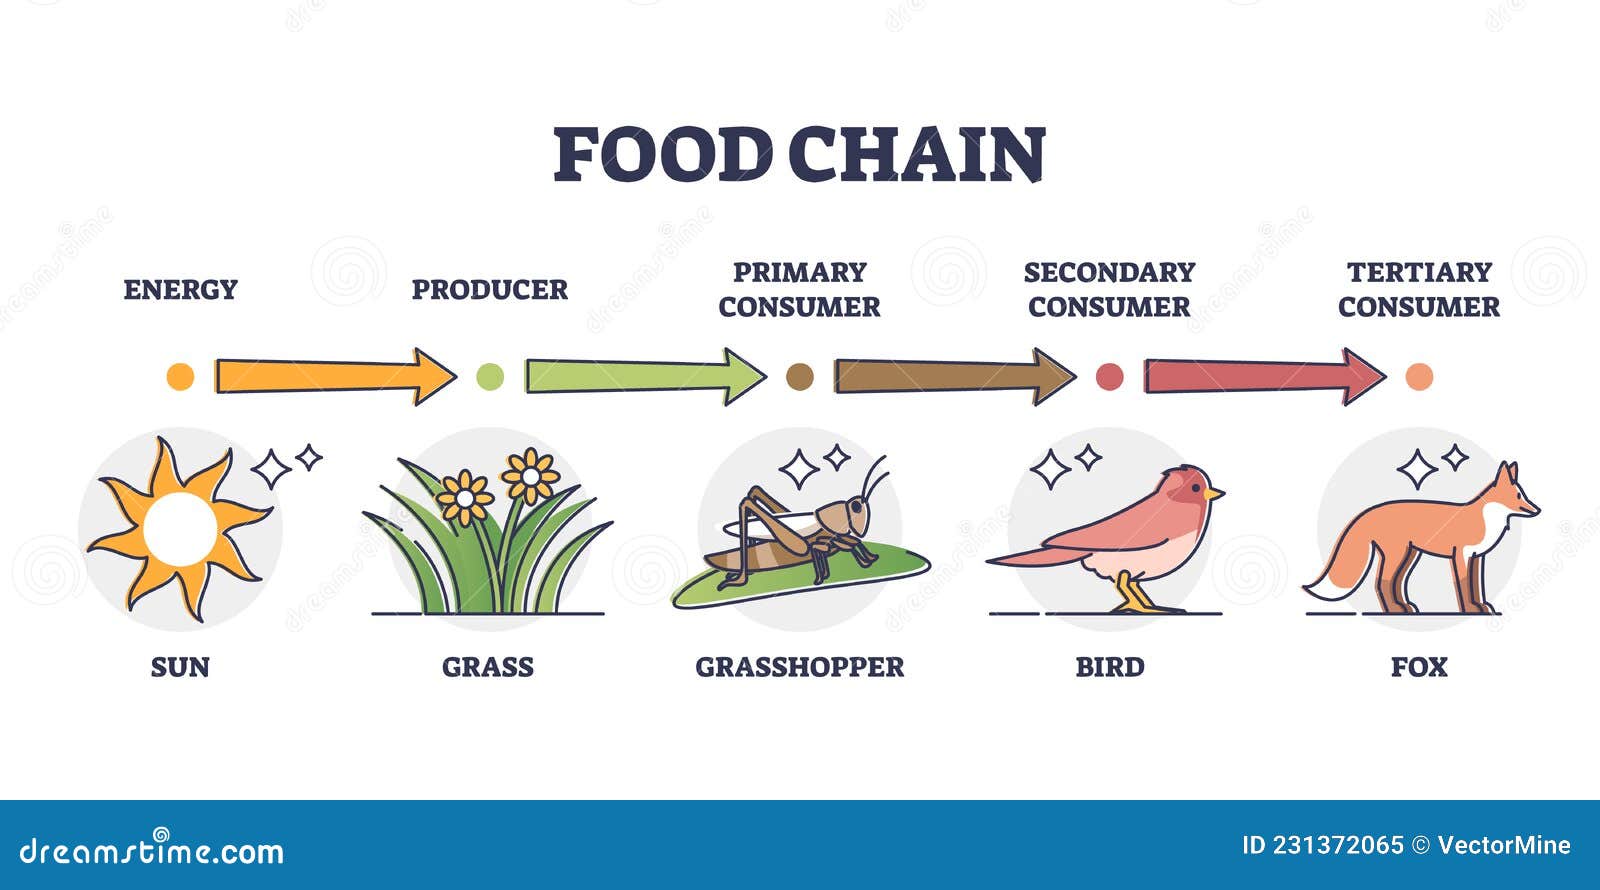 Food Chain Levels and Animal Classification by Eating Type Outline Diagram  Stock Vector - Illustration of scheme, vector: 231372065